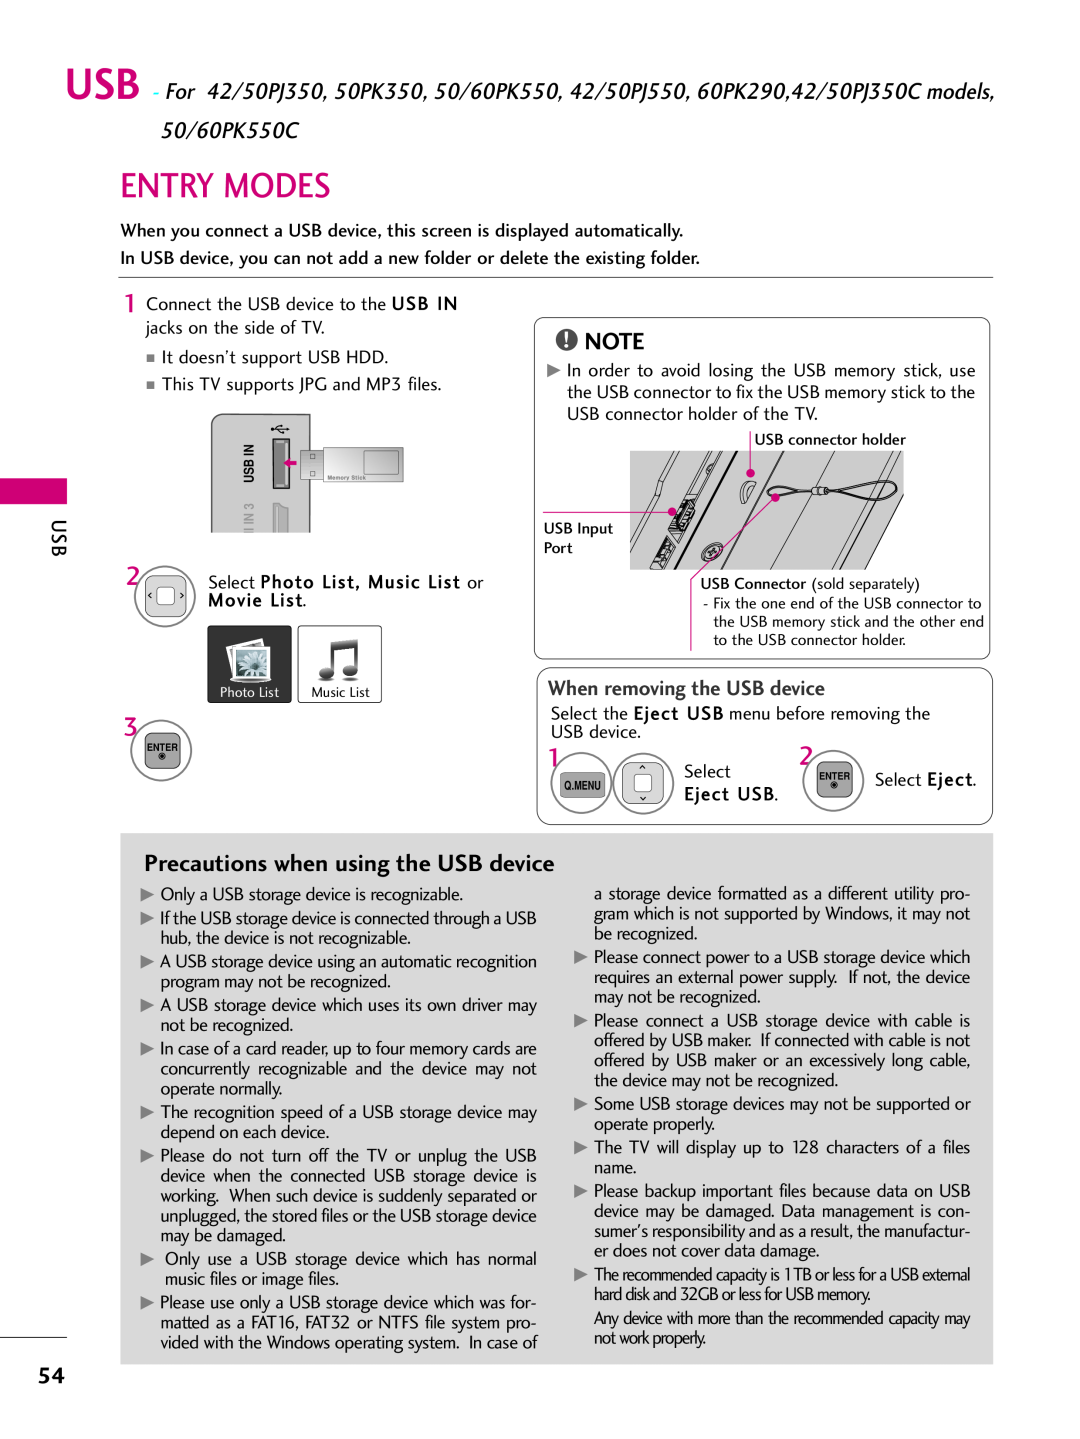 LG Electronics 42PJ250 Entry Modes, Precautions when using the USB device, 50/60PK550C, When removing the USB device 